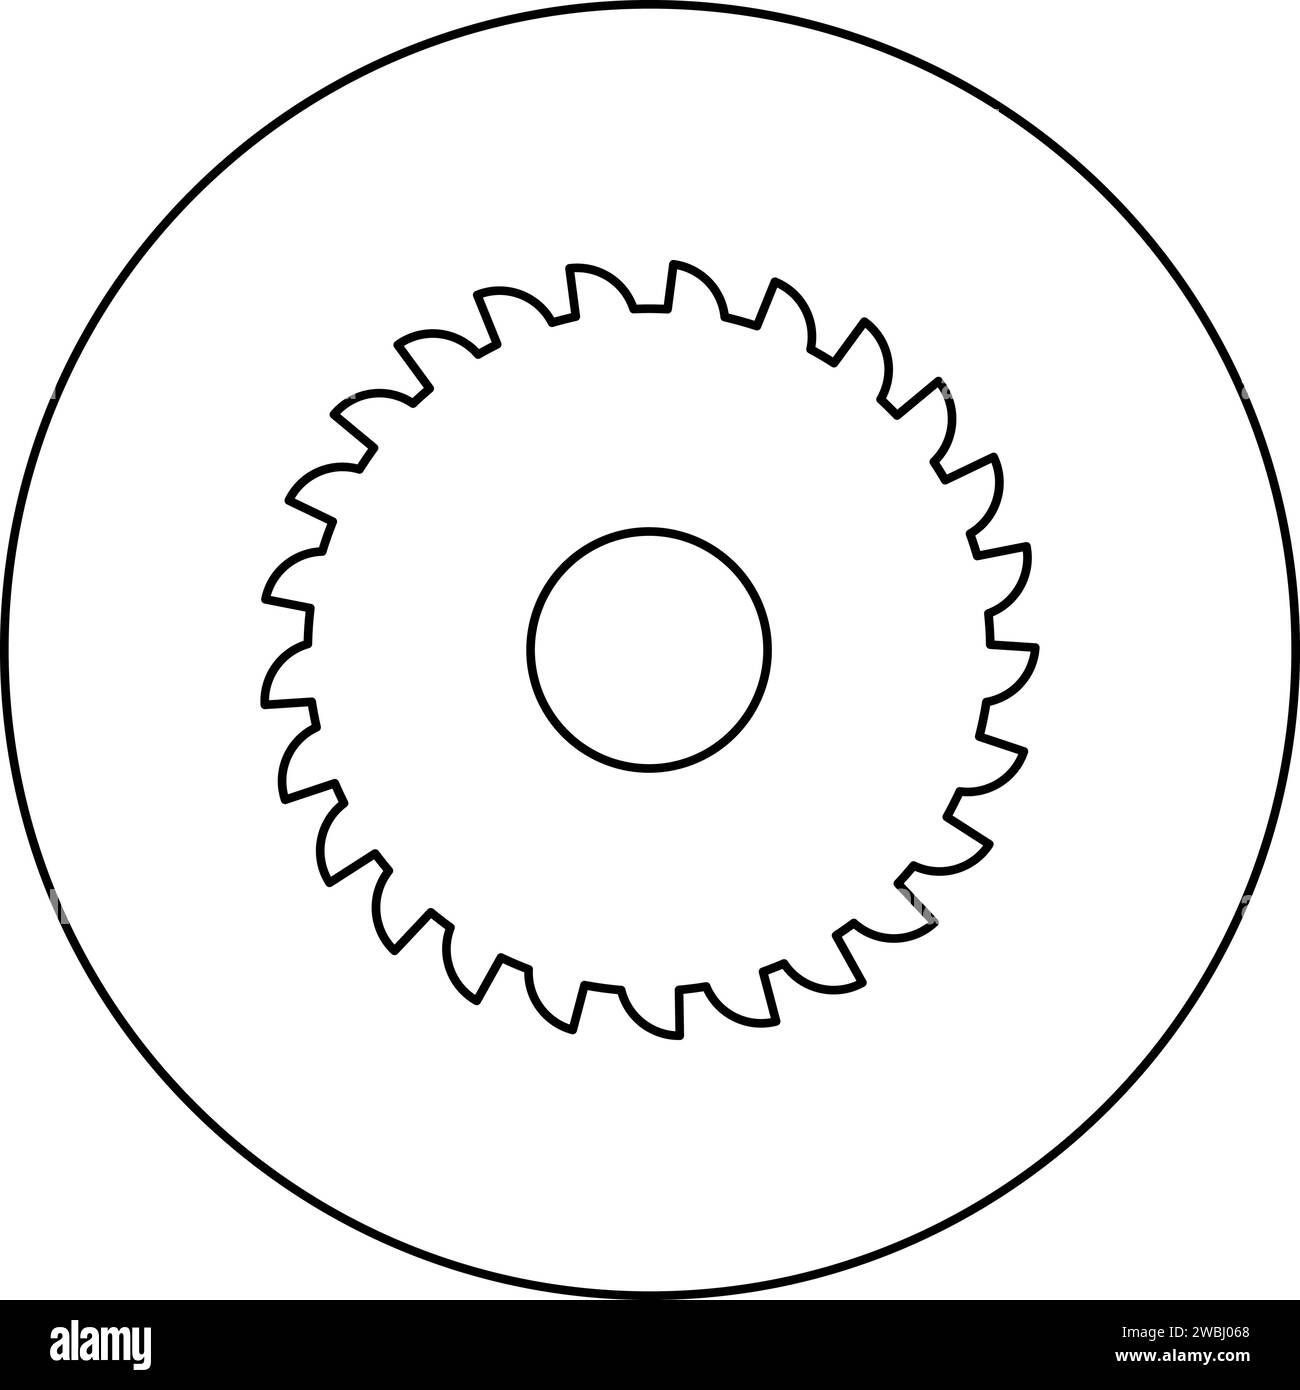 Round knife millstone circular saw disc icon in circle round black color vector illustration image outline contour line thin style simple Stock Vector